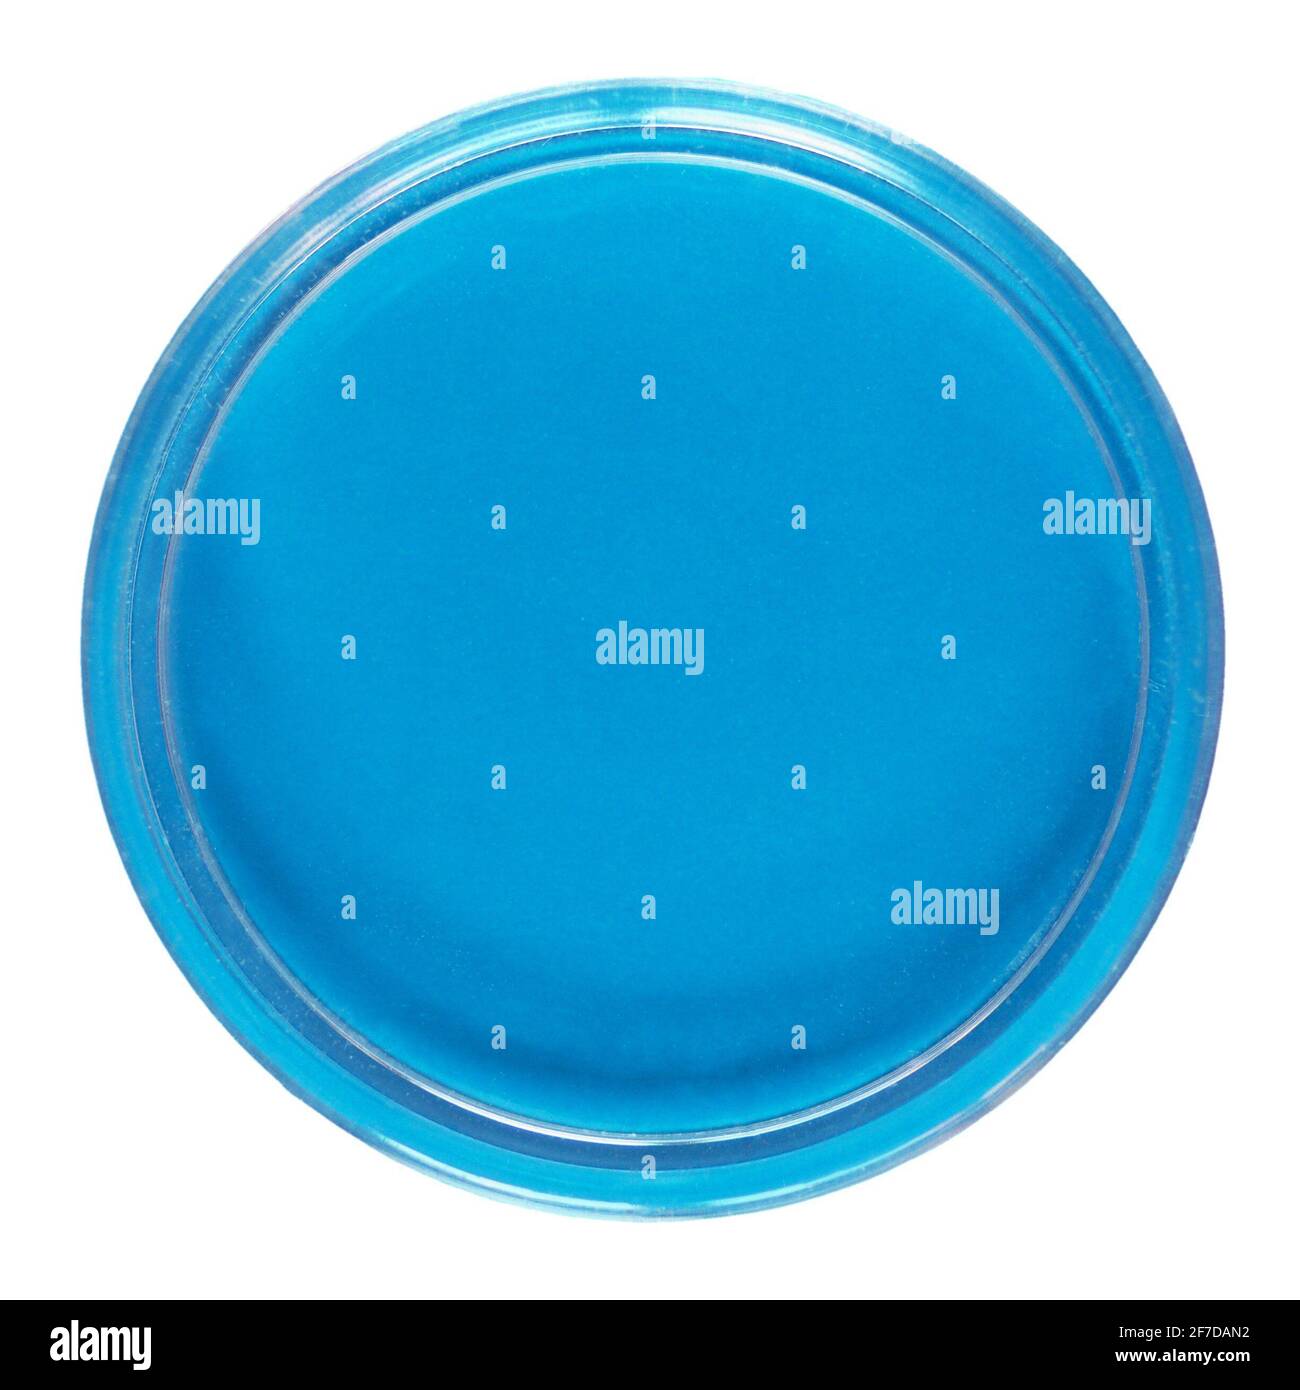 A Petri dish (aka Petrie dish, Petri plate or cell culture dish) cylindrical glass or plastic lidded dish used to culture cells such as bacteria or mo Stock Photo